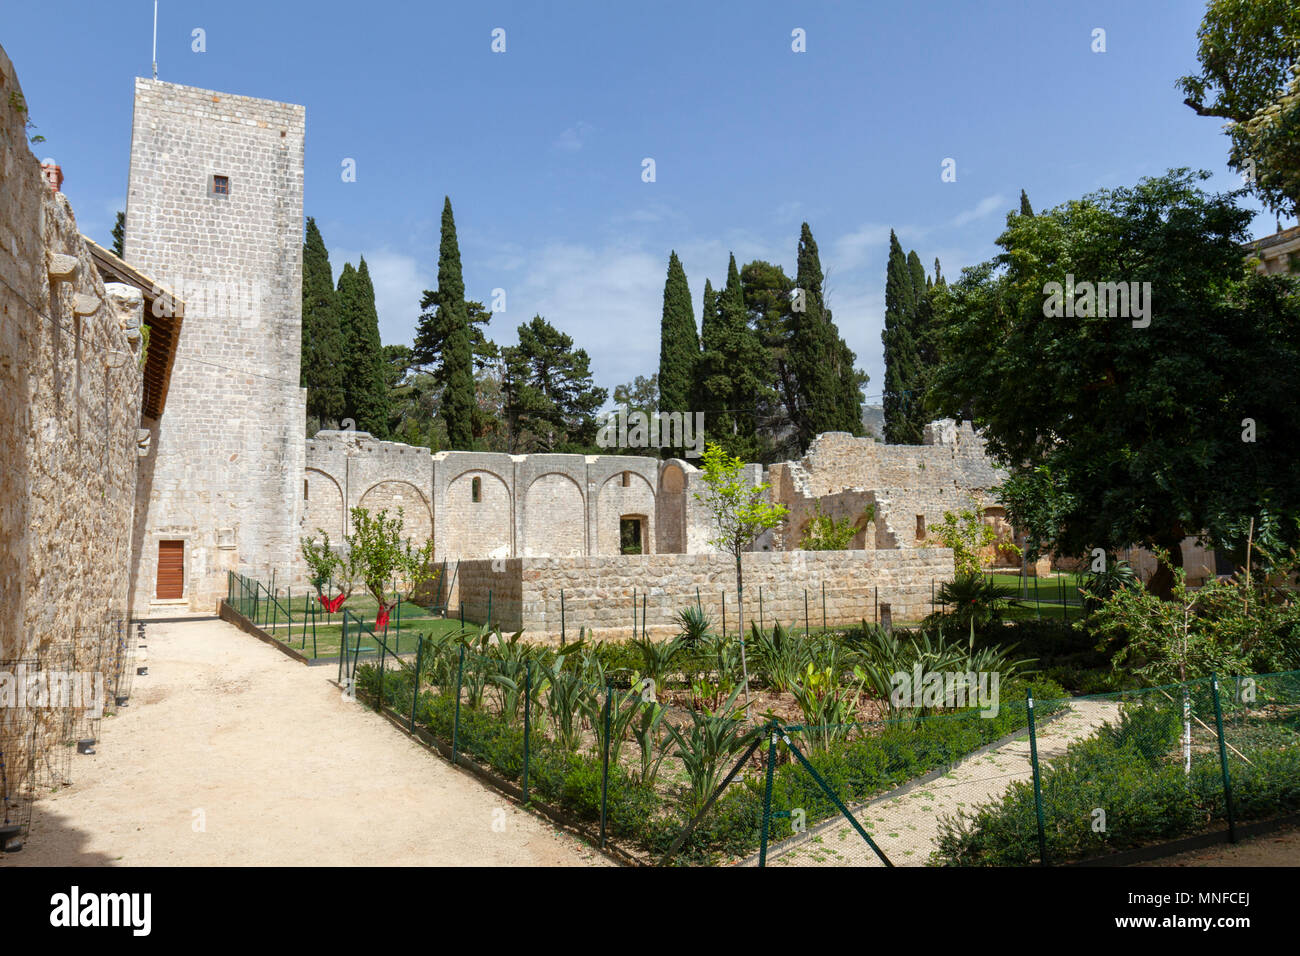 The tower, part of the destroyed cloisters inside the the former Benedictine monastery on Lokrum Island, in the Adriatic Sea off Dubrovnik, Croatia. Stock Photo